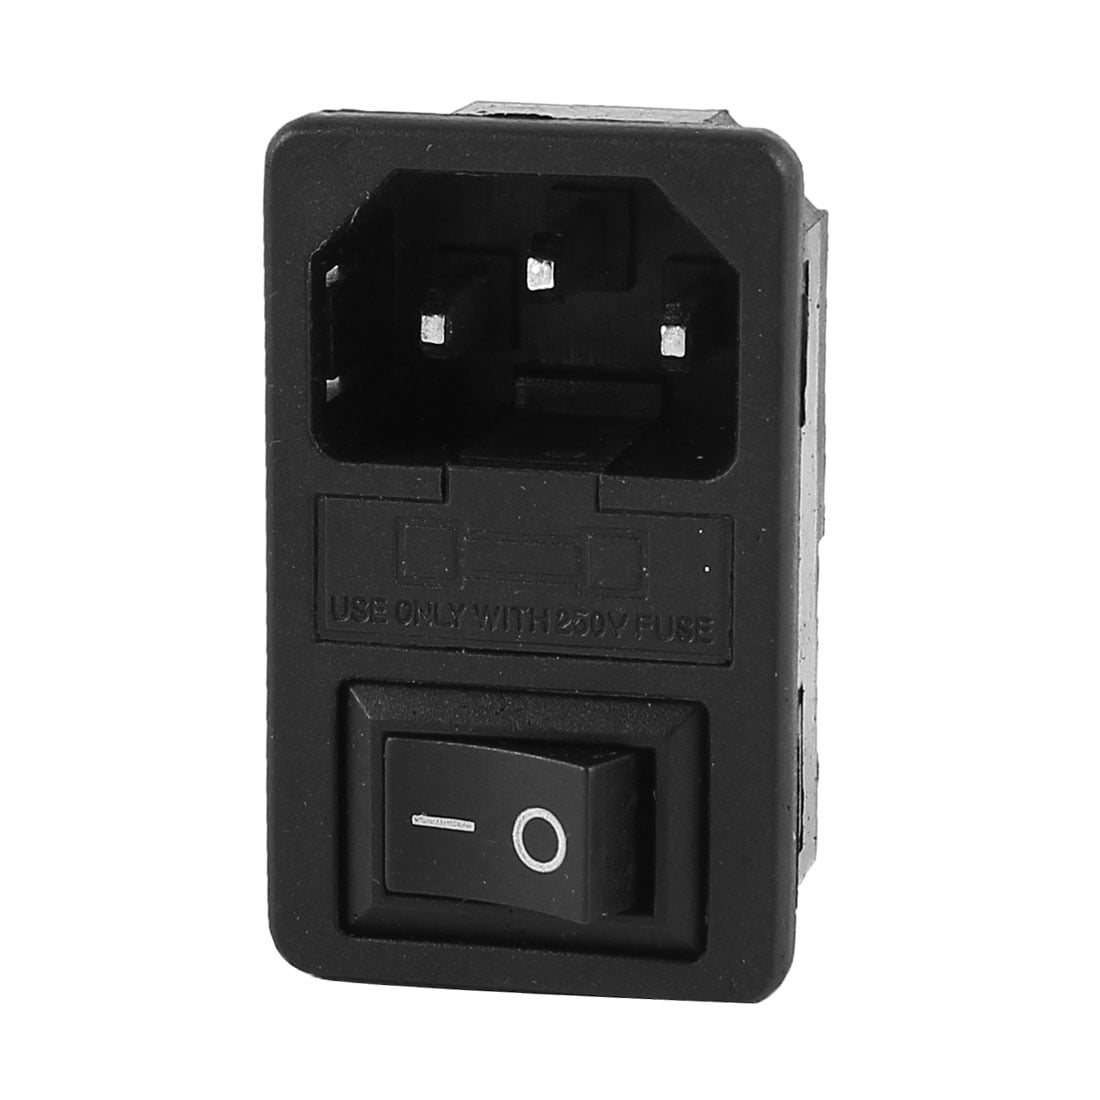 5x IEC320 C14 Male Power Socket with Fuse Rocker Switch Connector Plug Connector 